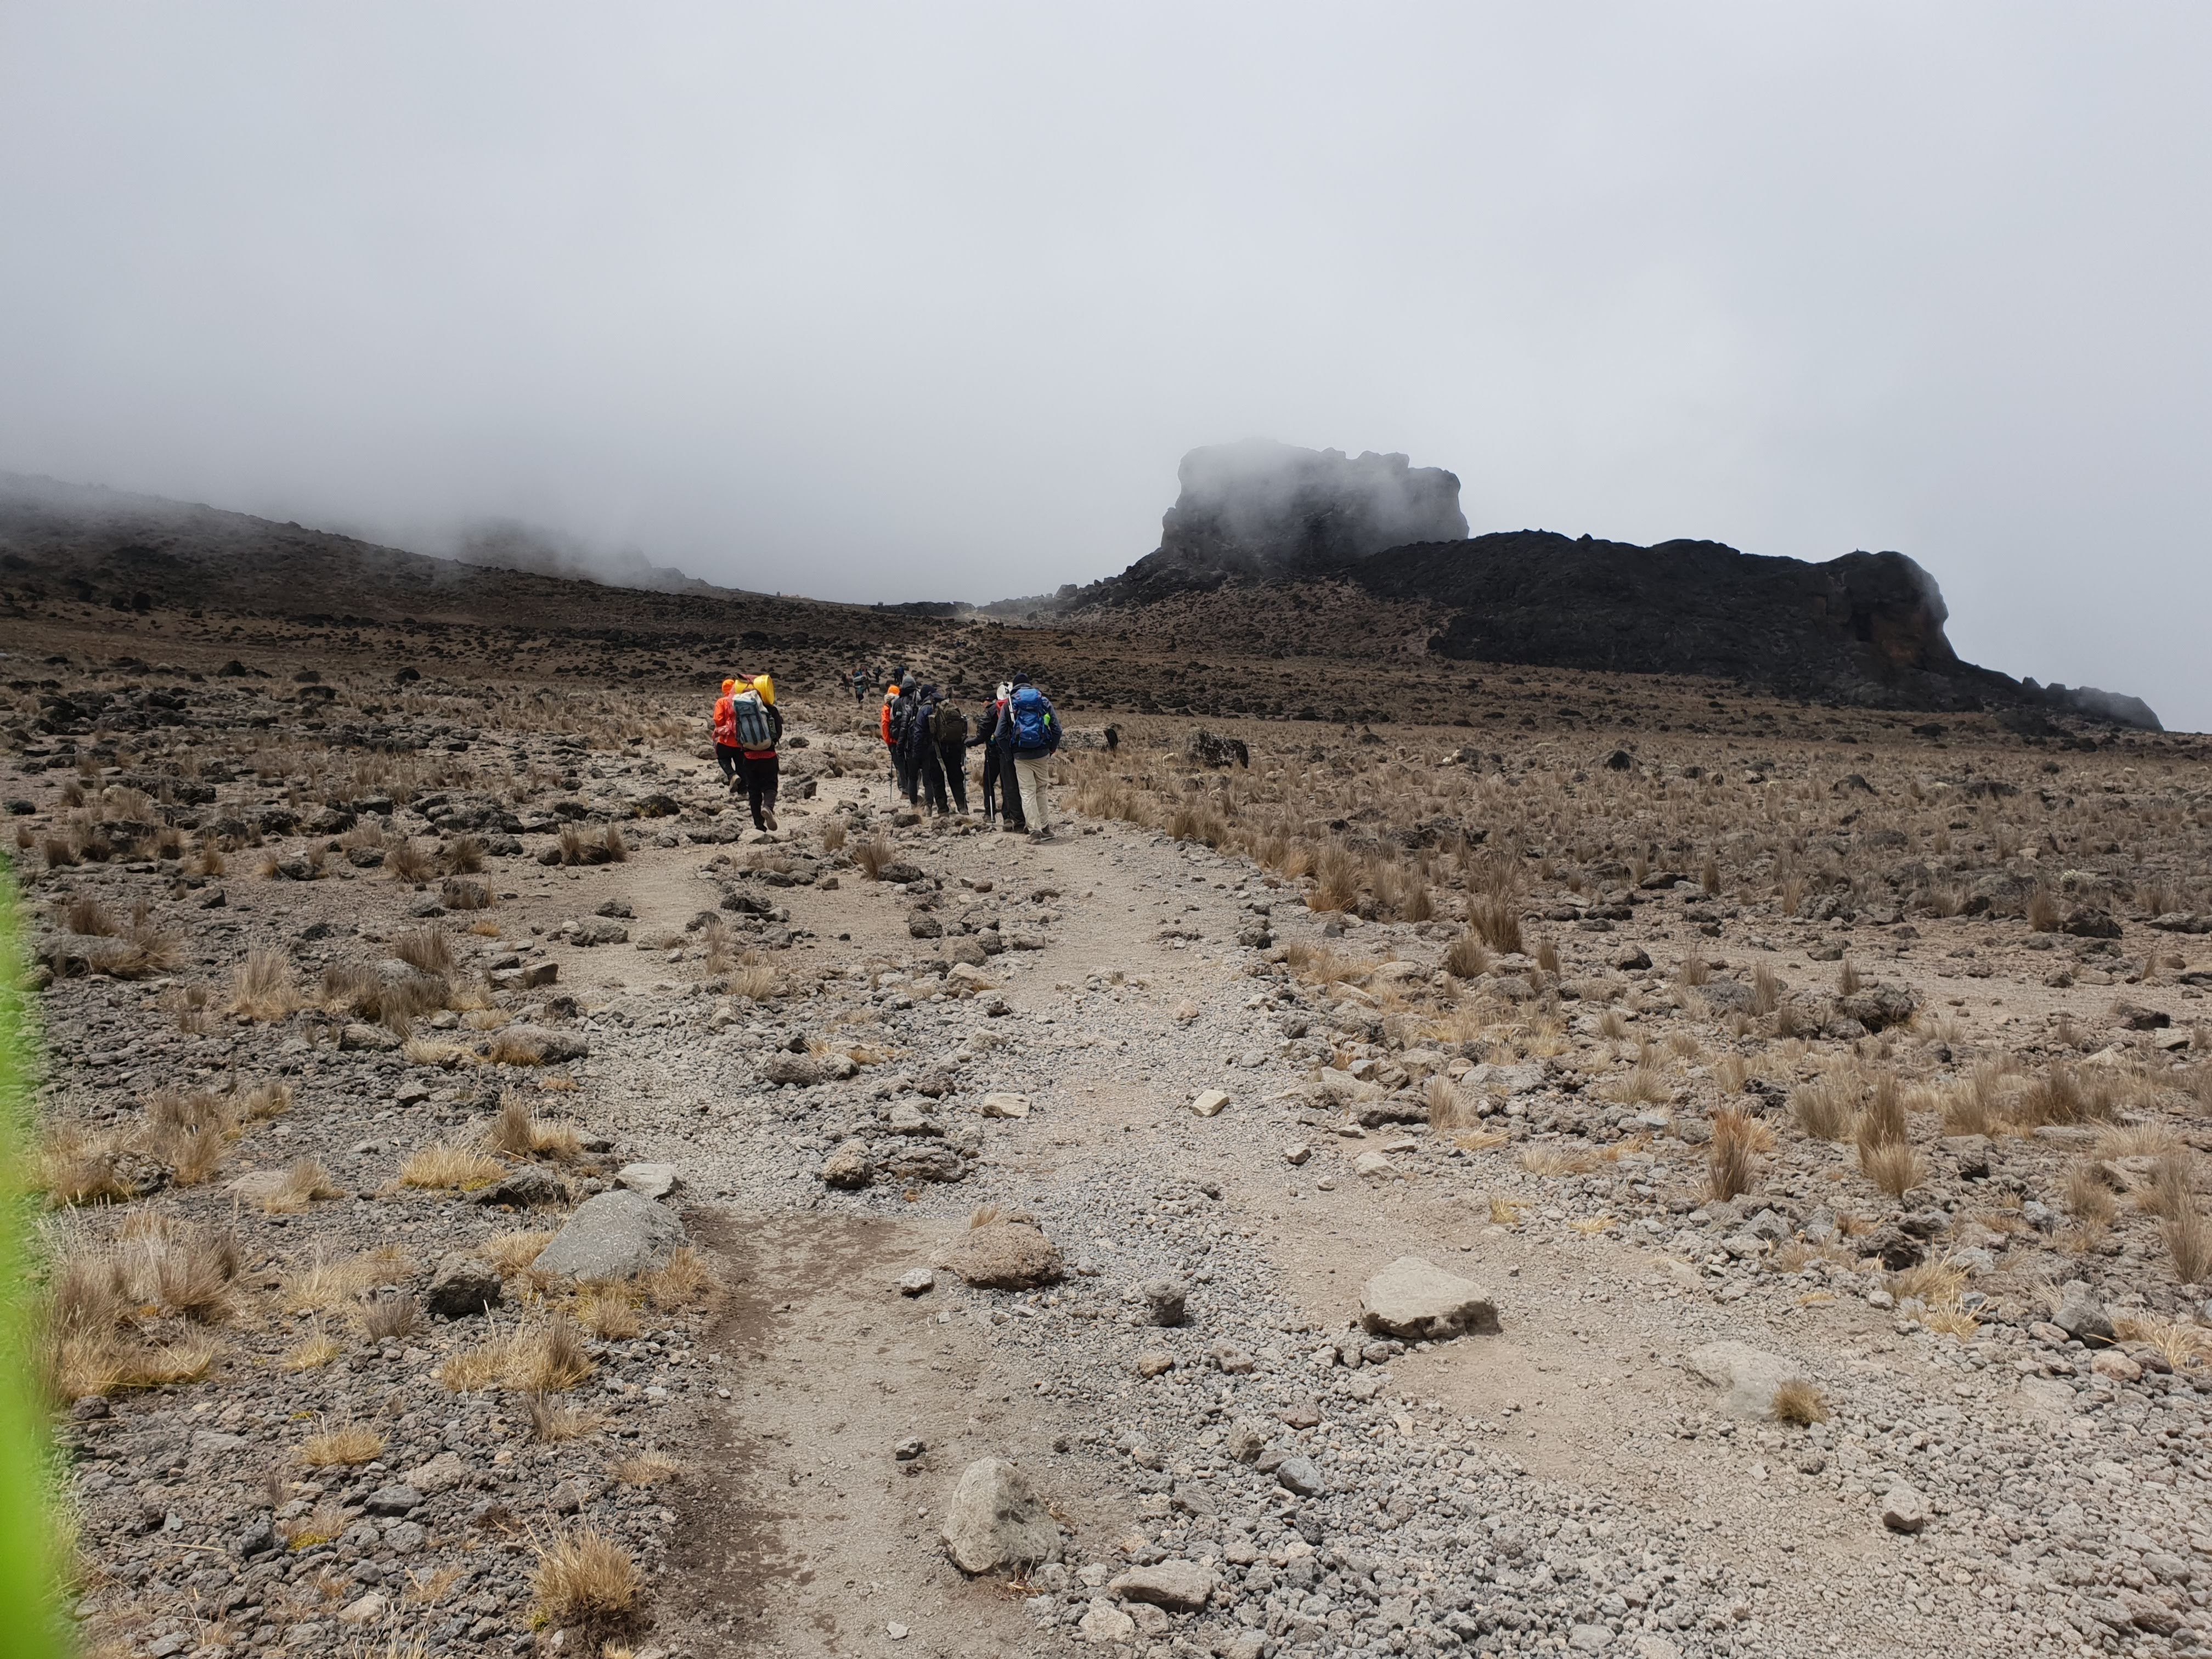 Final route to Lava Tower on Kilimanjaro